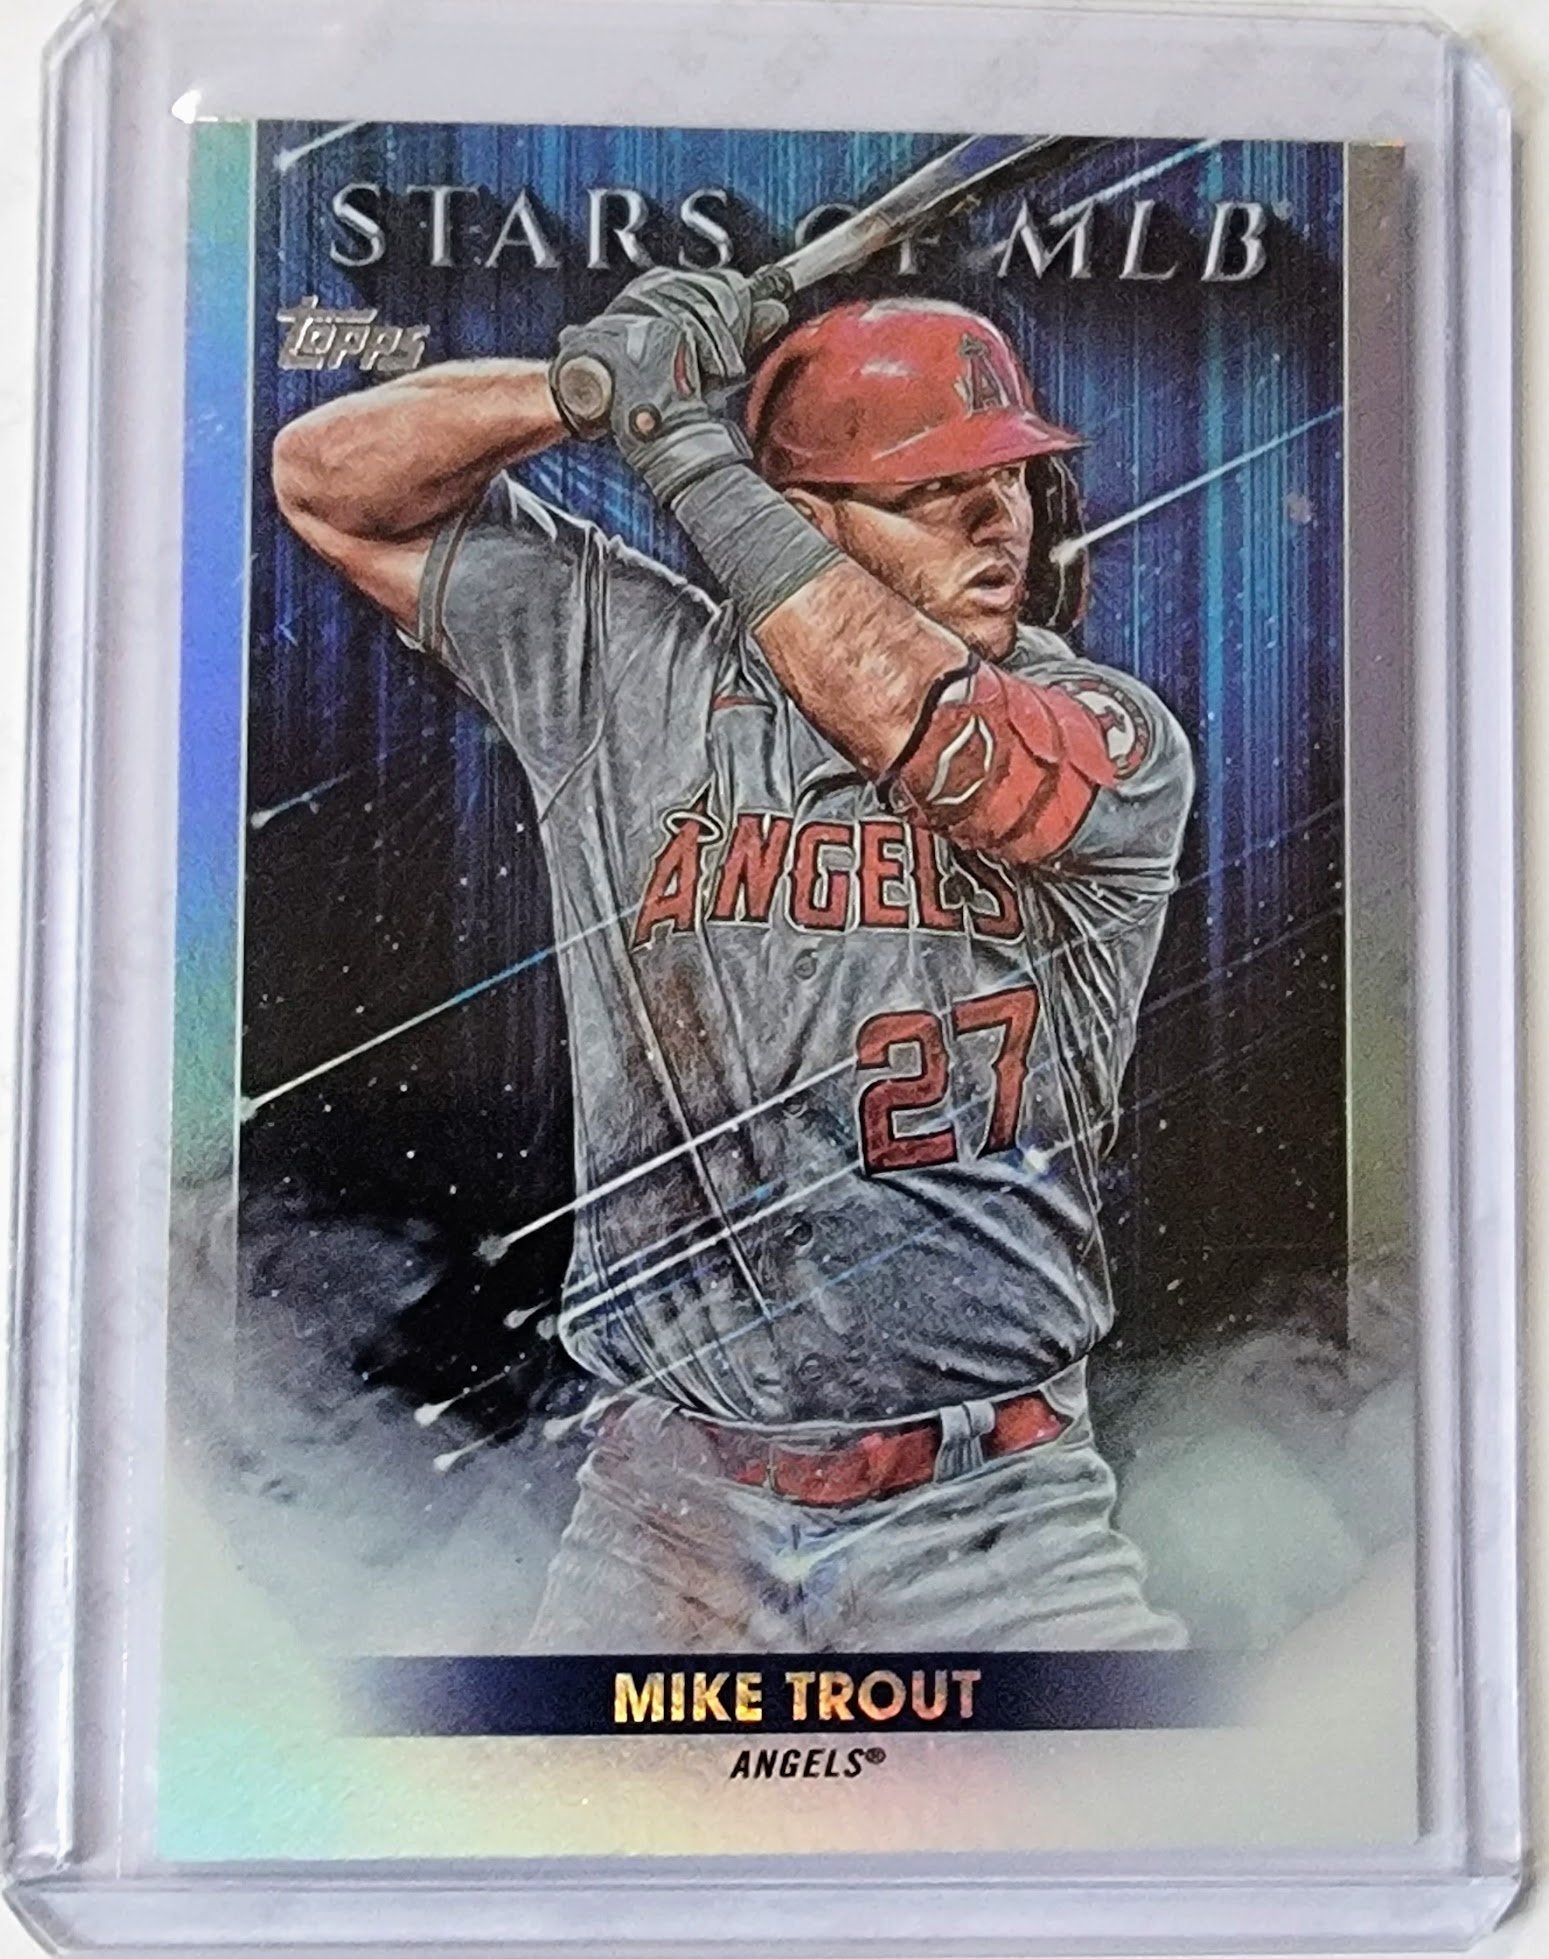 2022 Topps Mike Trout Stars of the MLB Baseball Trading Card GRB1 simple Xclusive Collectibles   